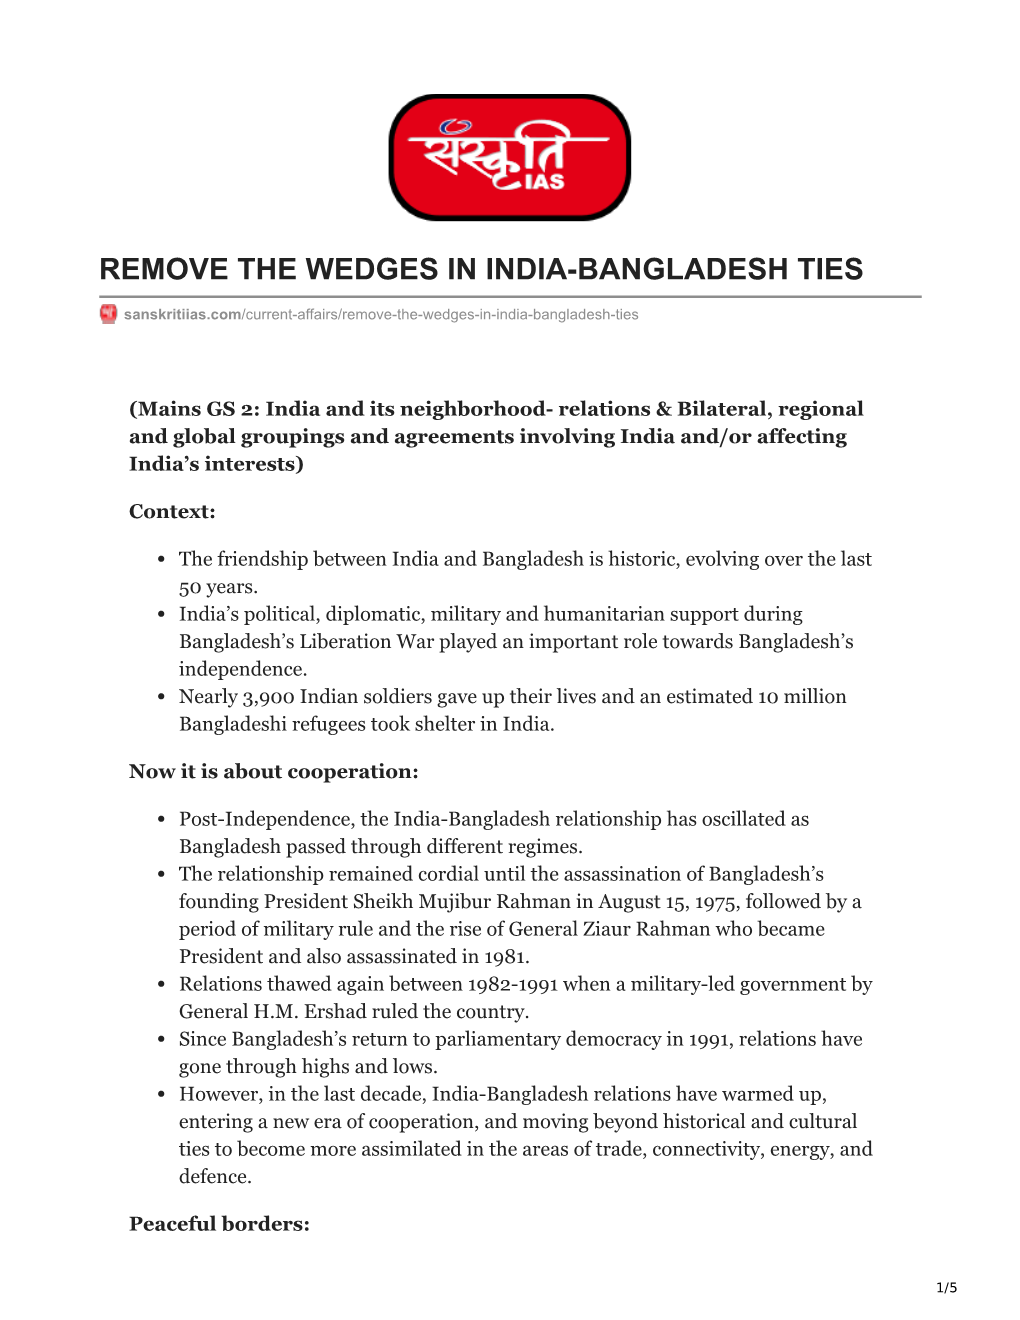 Remove the Wedges in India-Bangladesh Ties